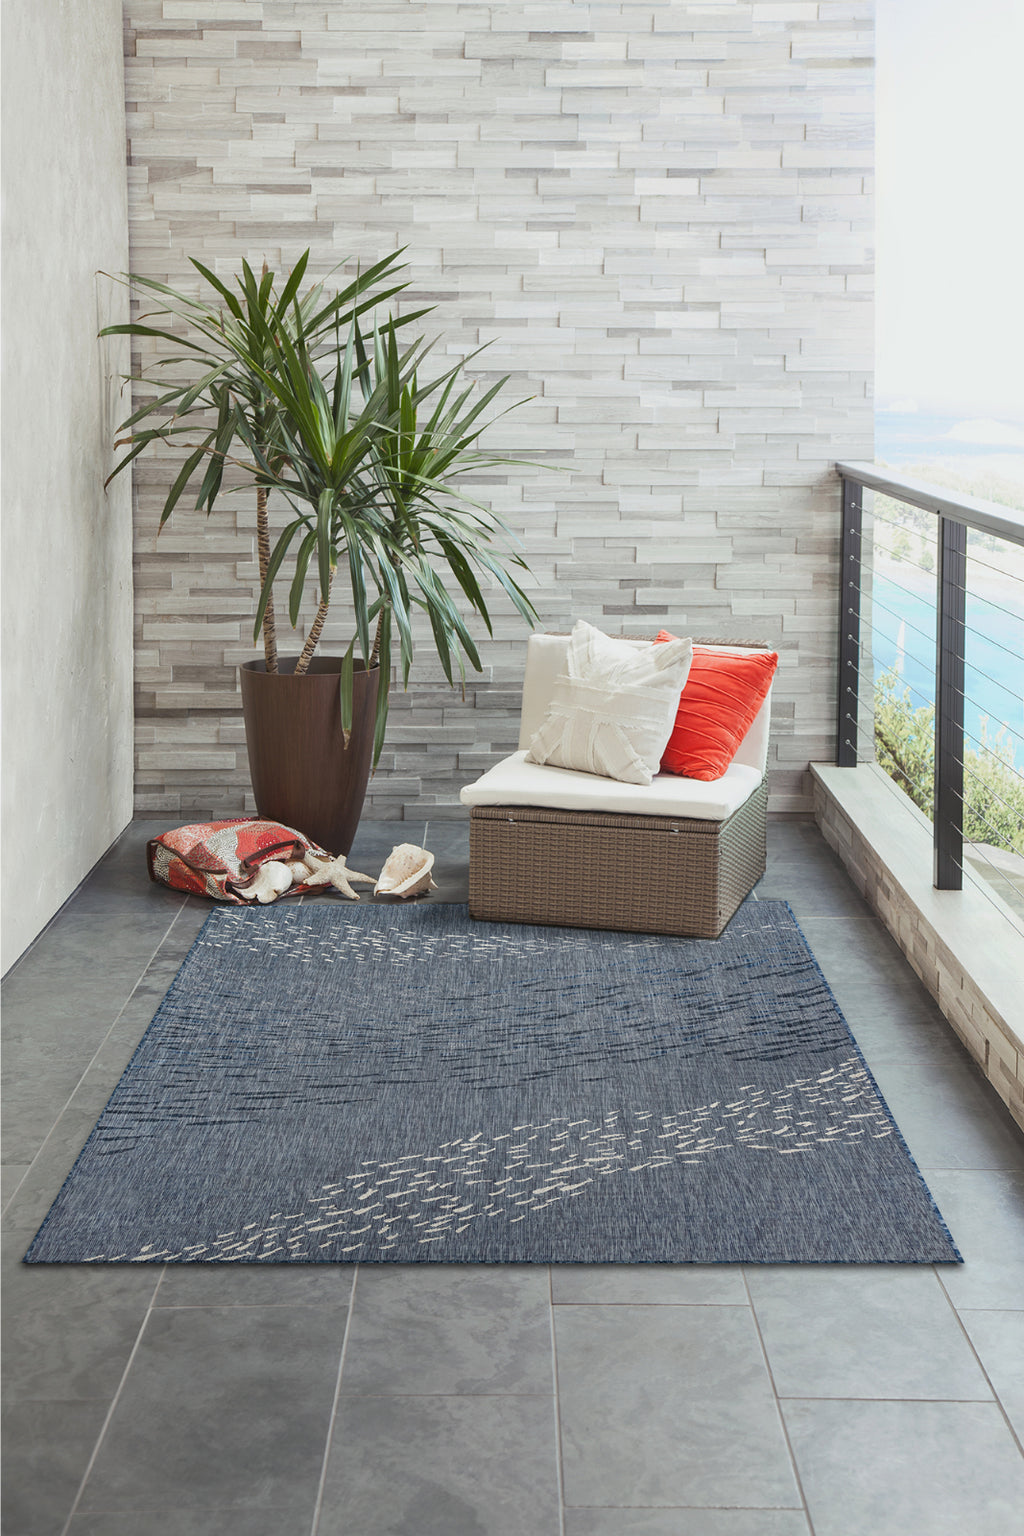 Trans Ocean Carmel 8449/33 School Of Fish Navy Area Rug by Liora Manne Room Scene Image Feature